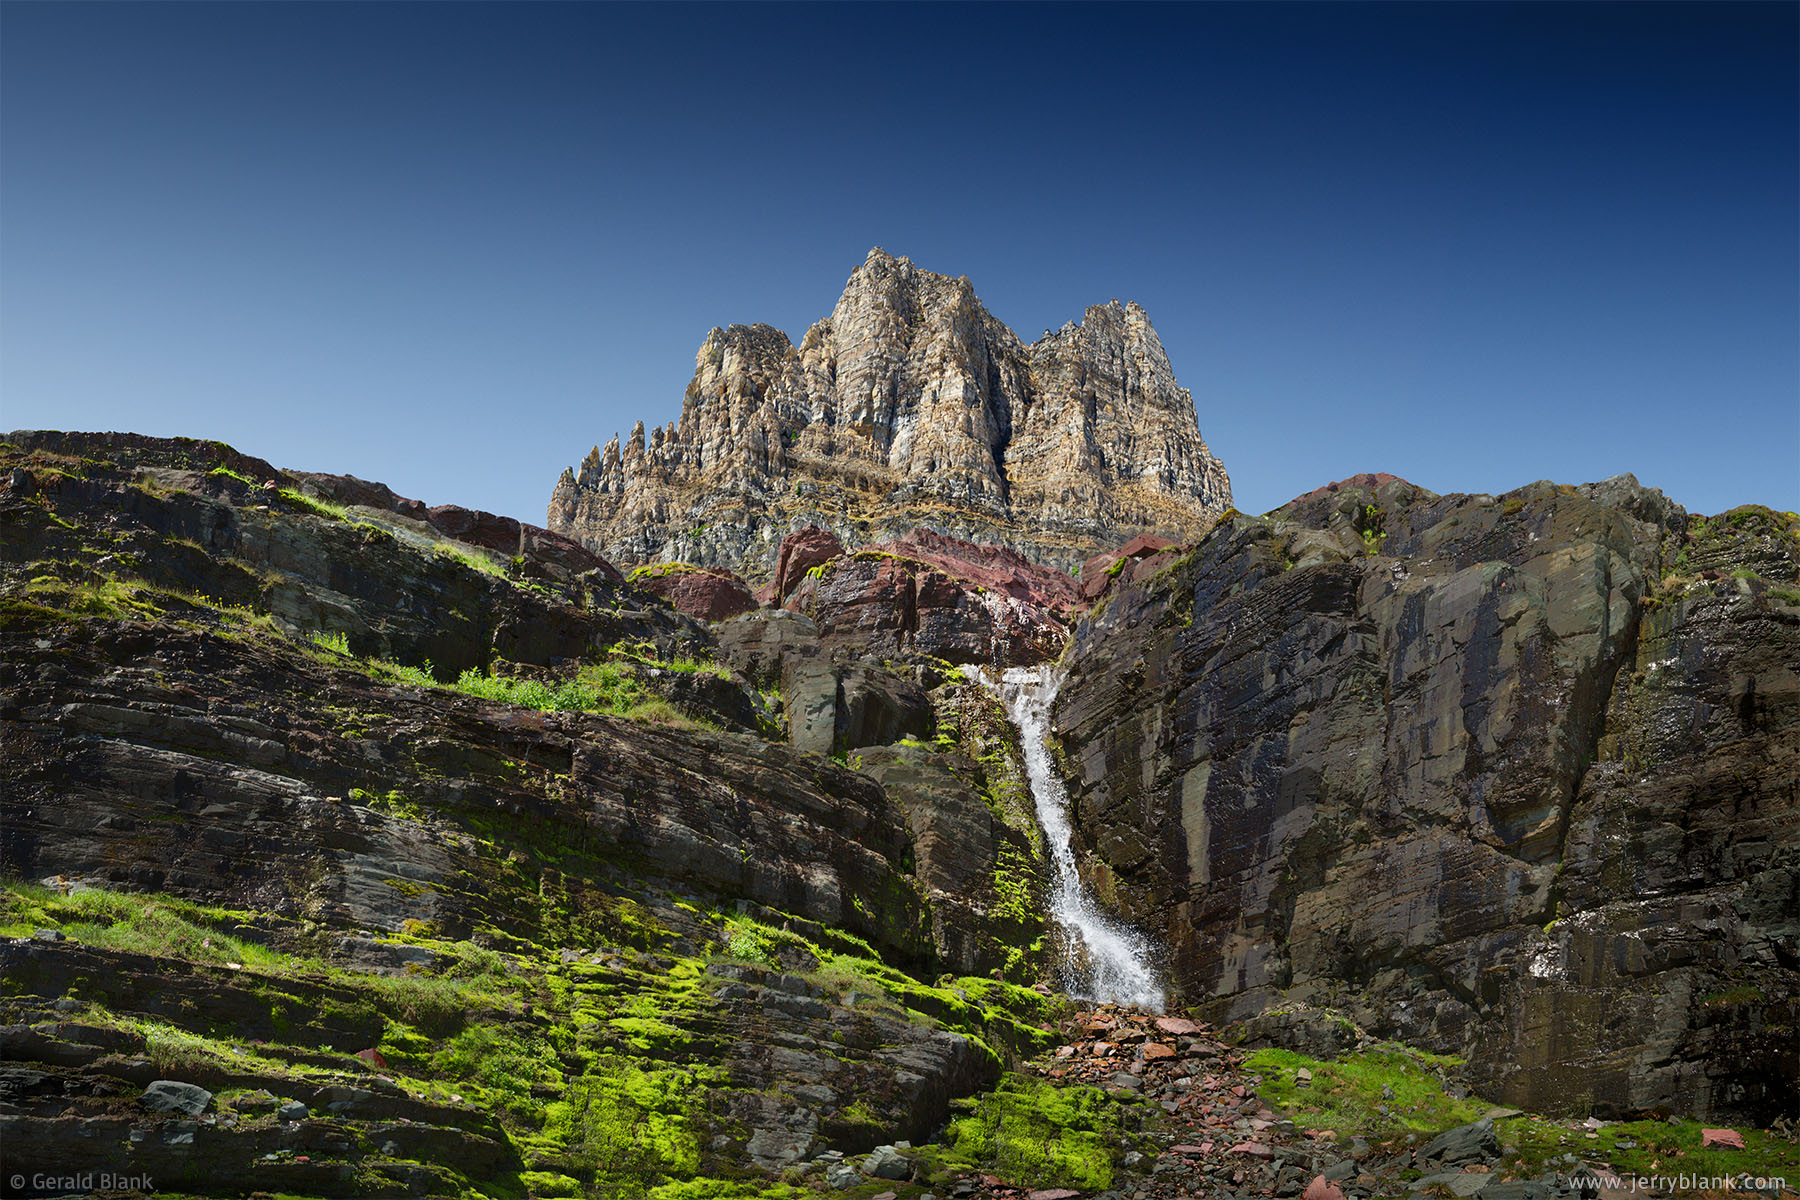 #26276 - Clements Mountain rises above moss-covered slopes and a waterfall on the east side of the Continental Divide, in Glacier National Park, Montana - photo by Jerry Blank